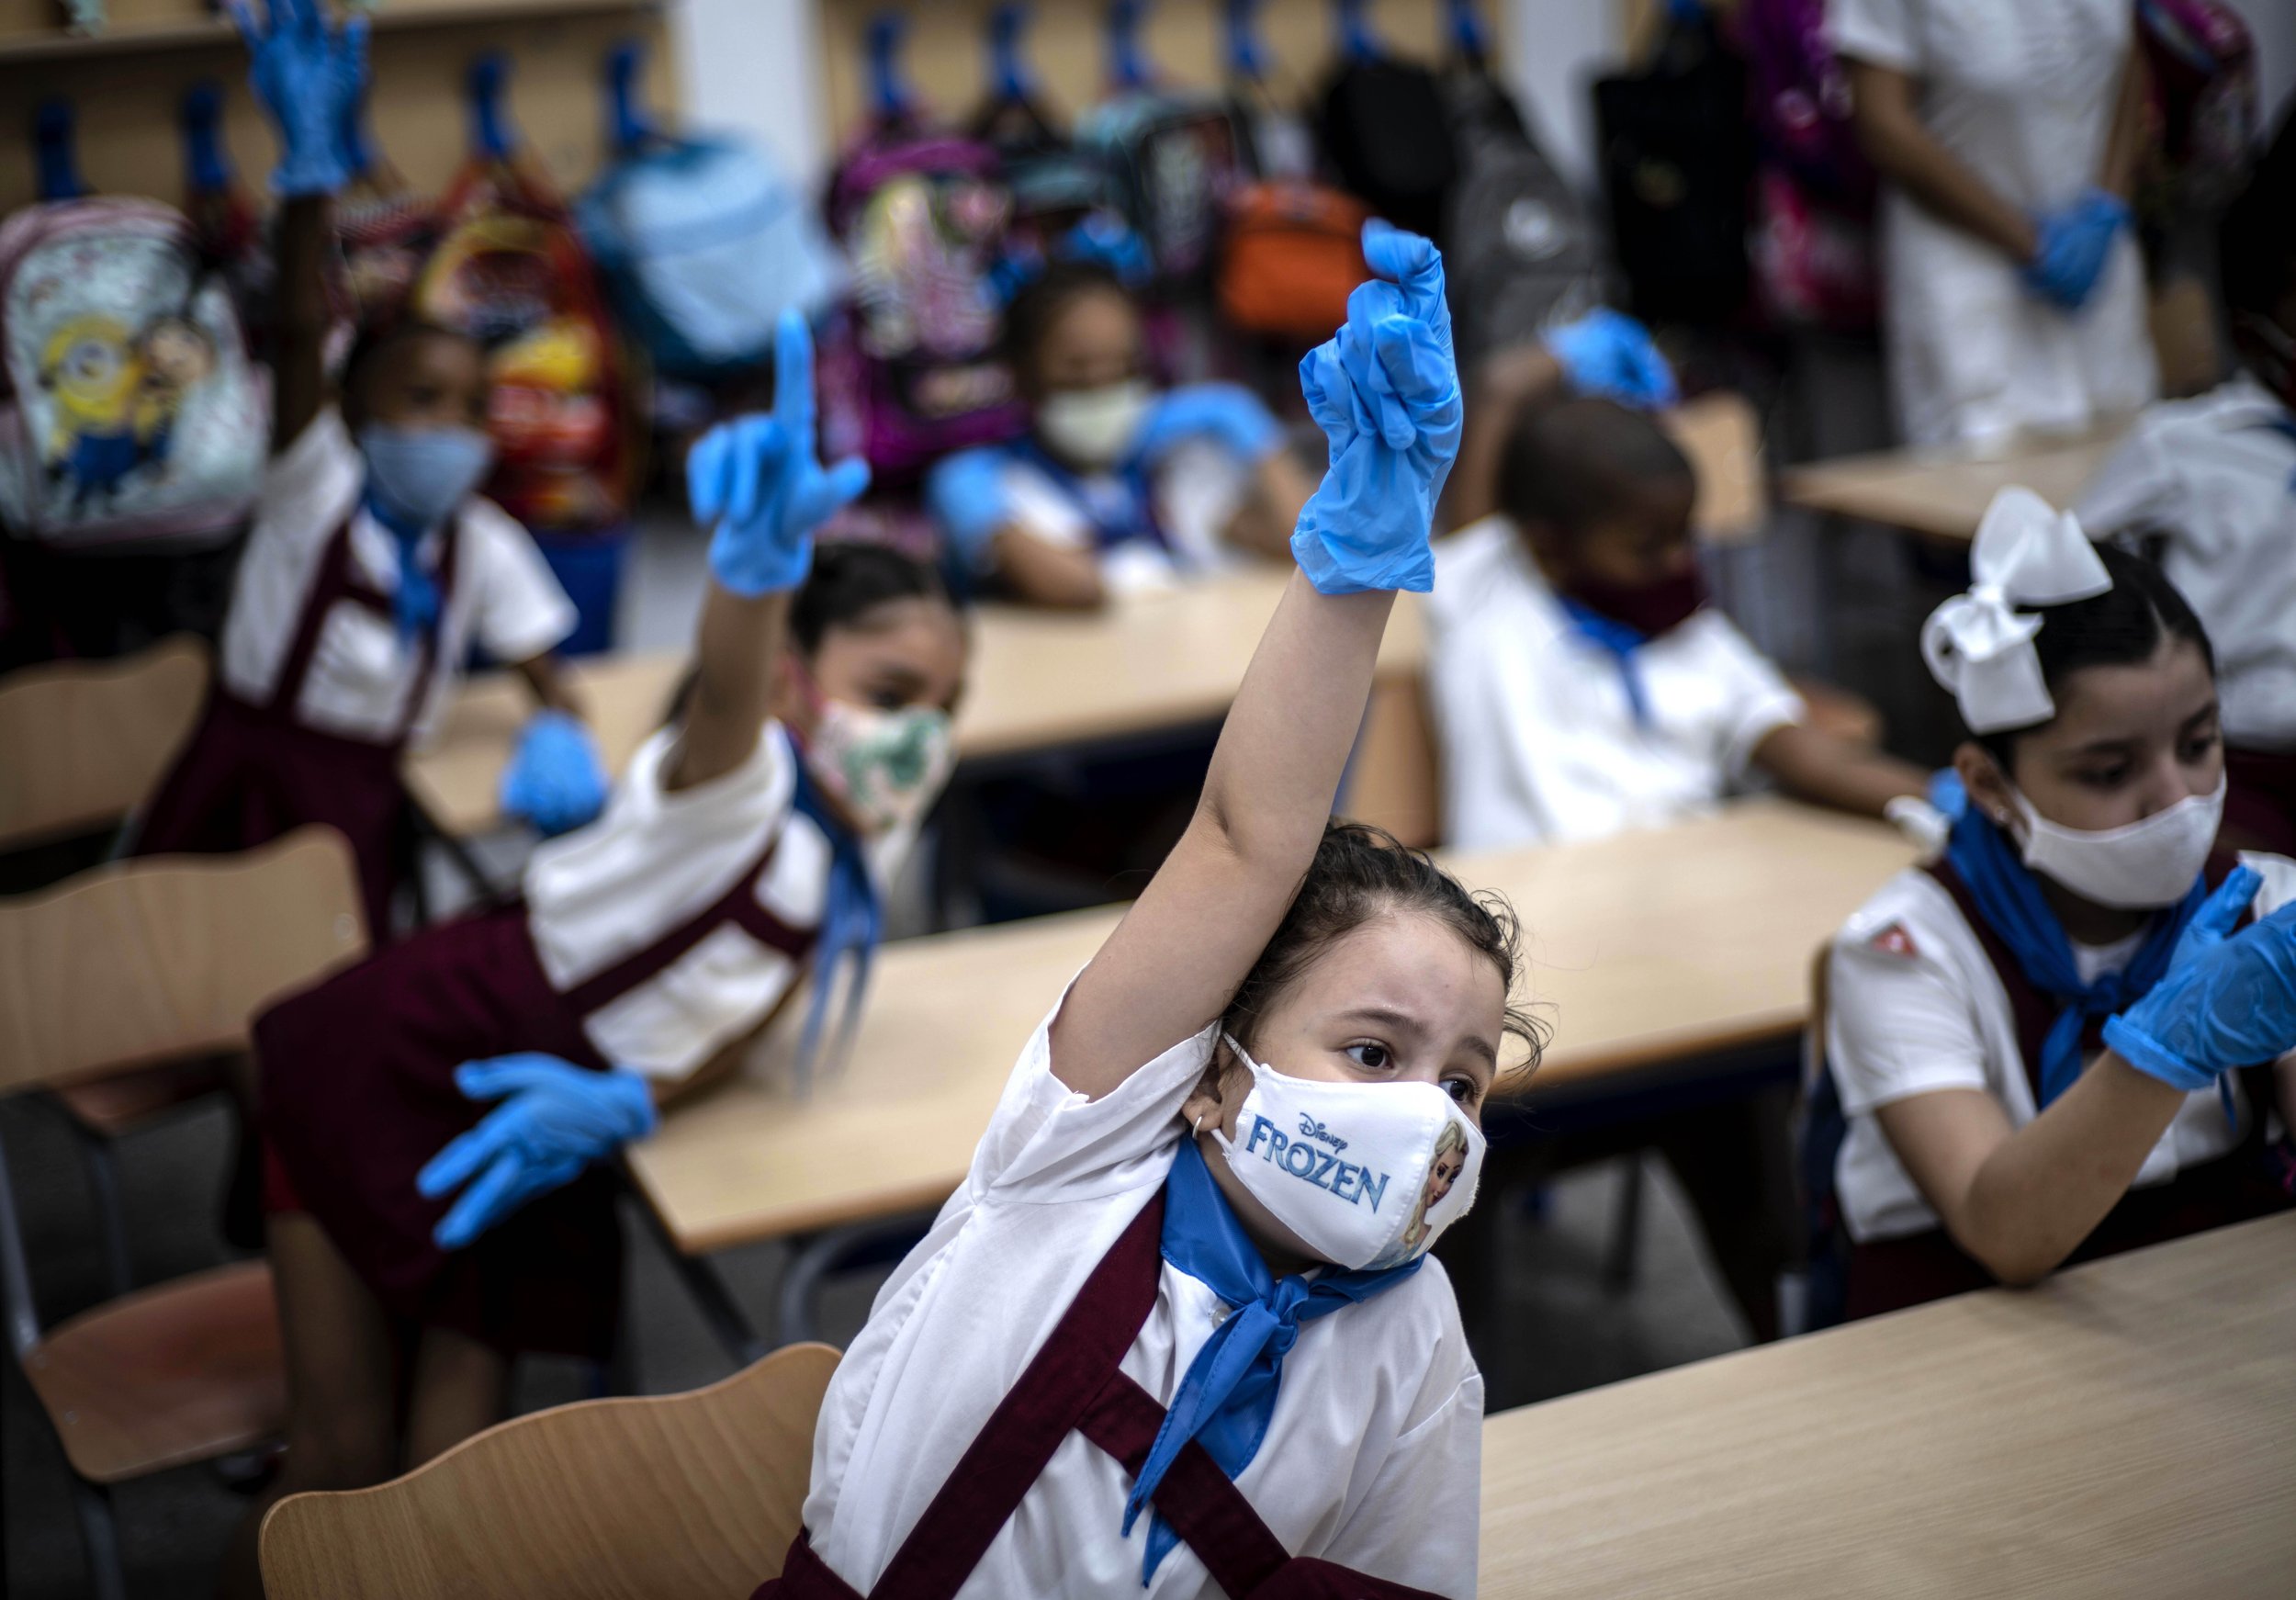  Wearing masks and plastic gloves amid the spread of the new coronavirus, girls raise her hands during class in Havana, Cuba, Monday, Nov. 2, 2020. (AP Photo/Ramon Espinosa) 